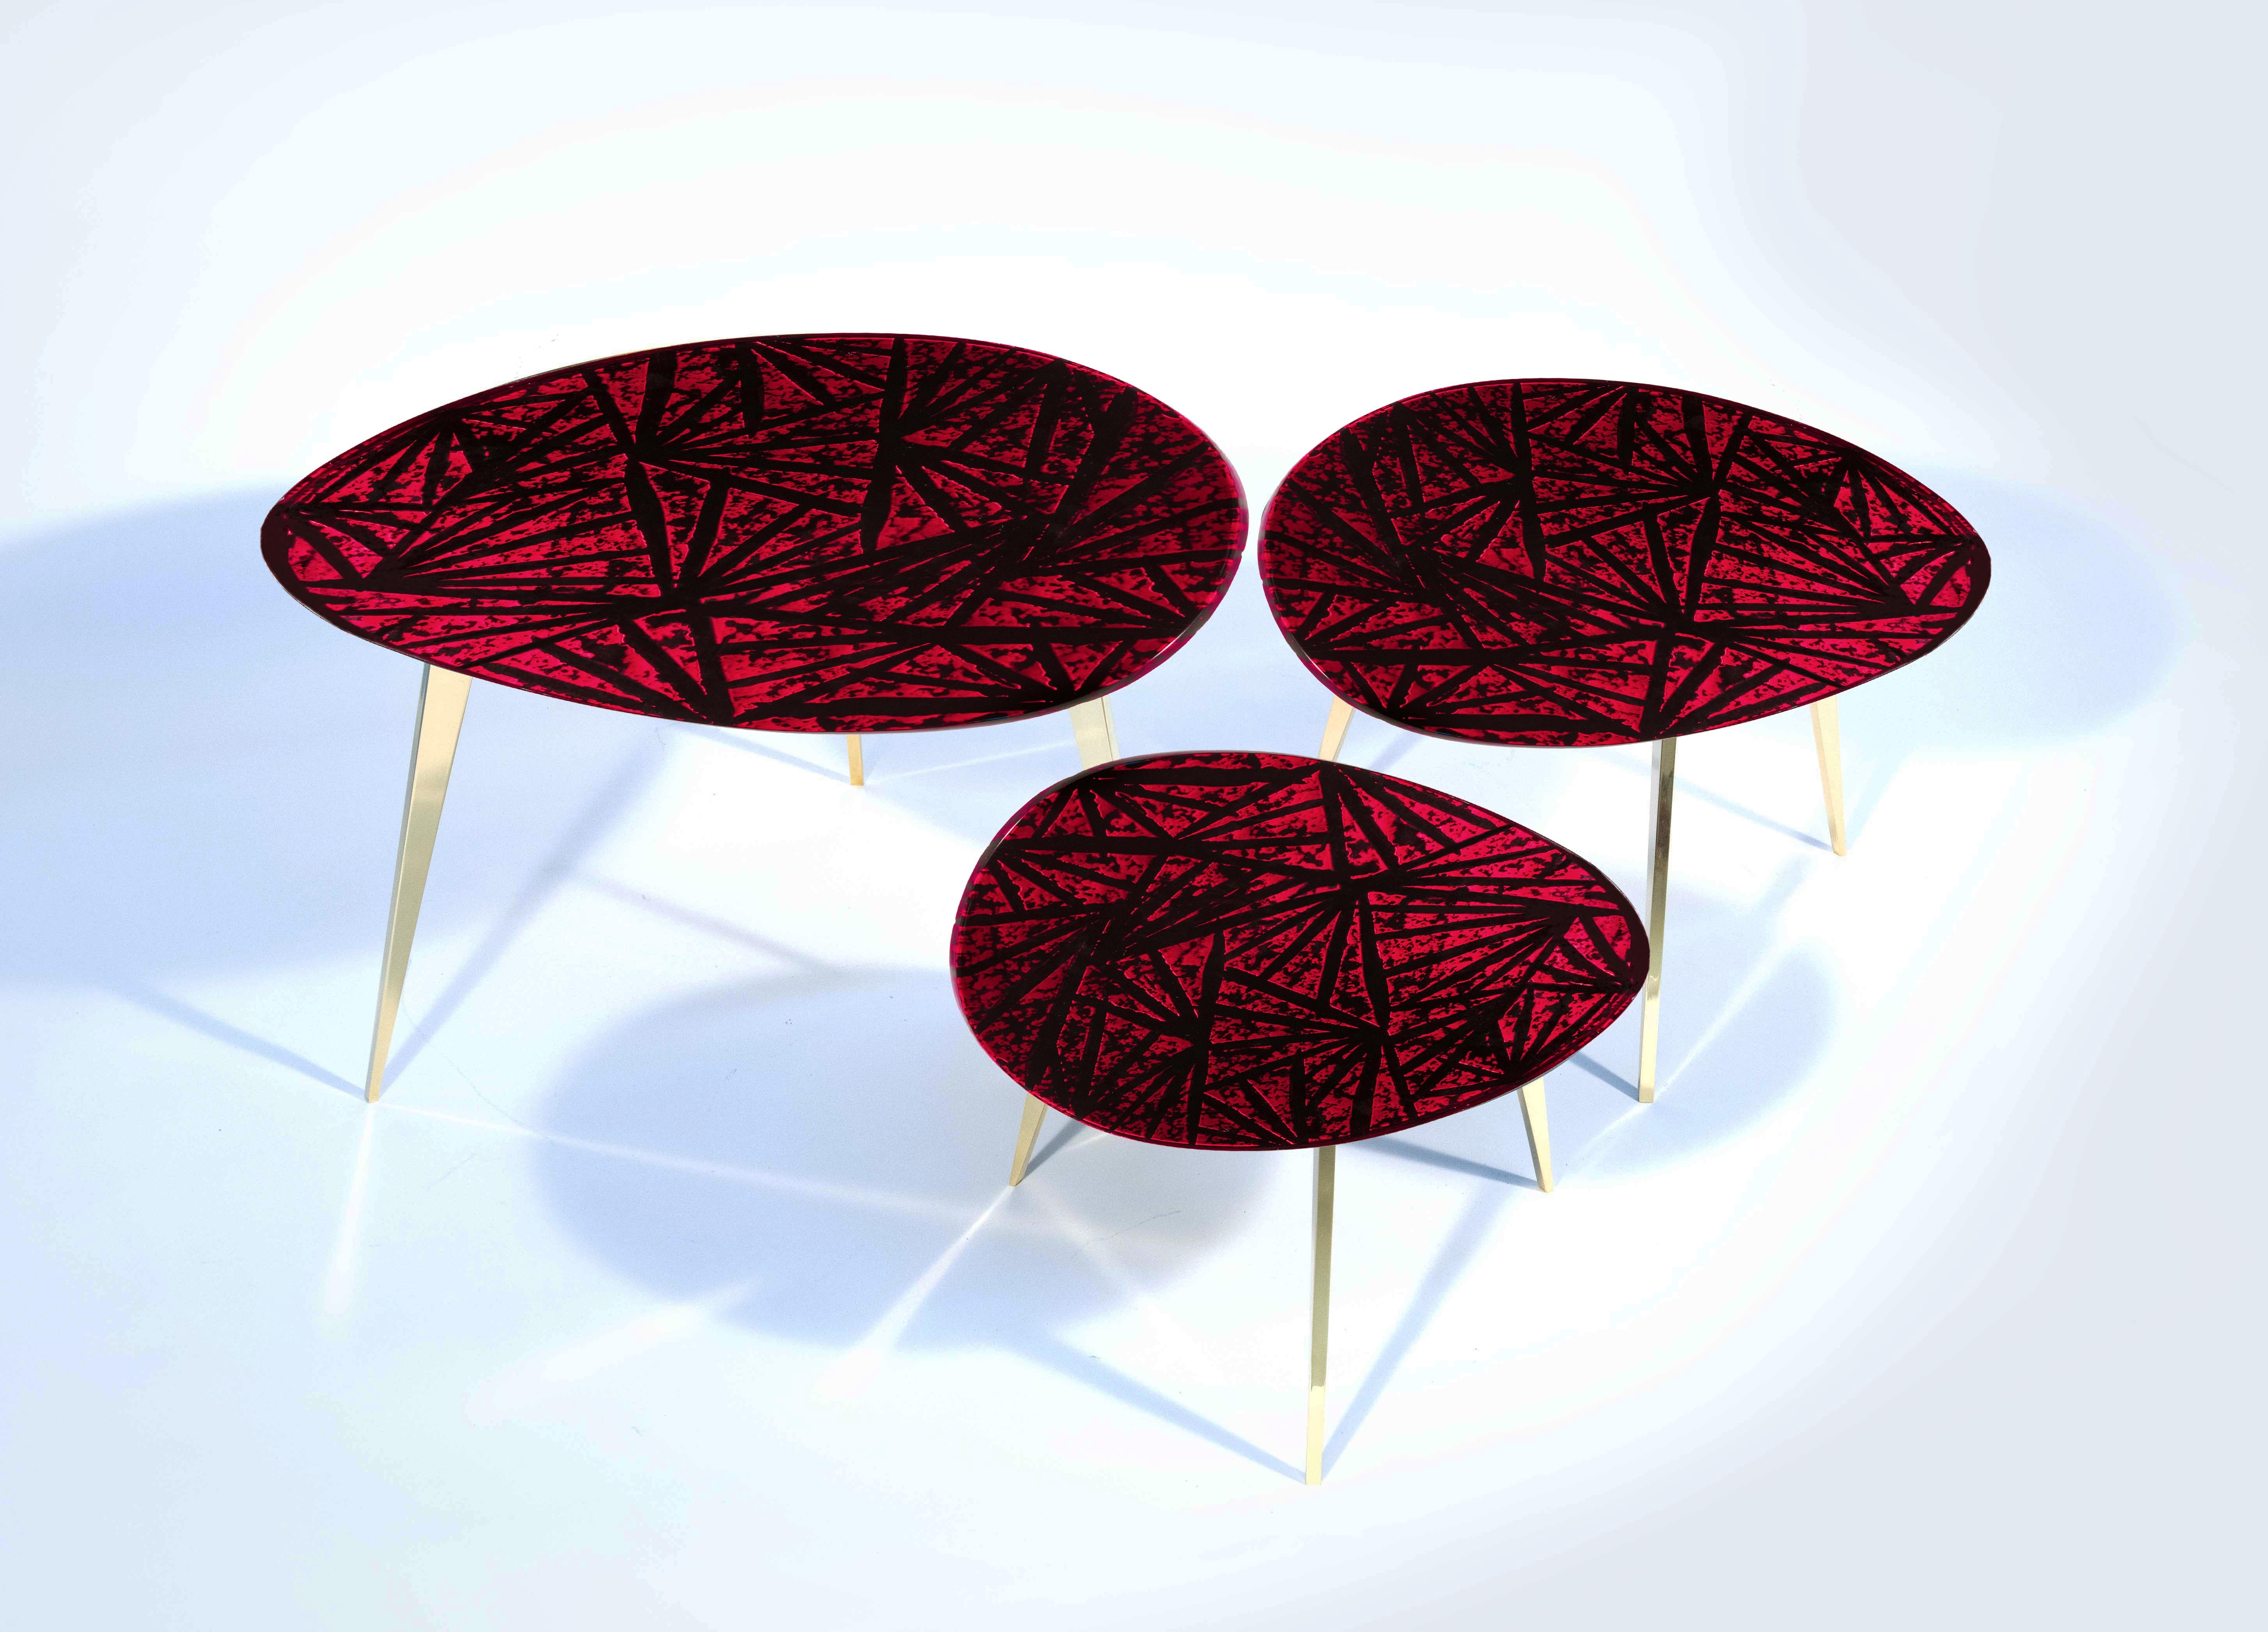 Modern Contemporary 'Rubino' Coffee Table Crystal and Brass Big Size by Ghirò Studio For Sale